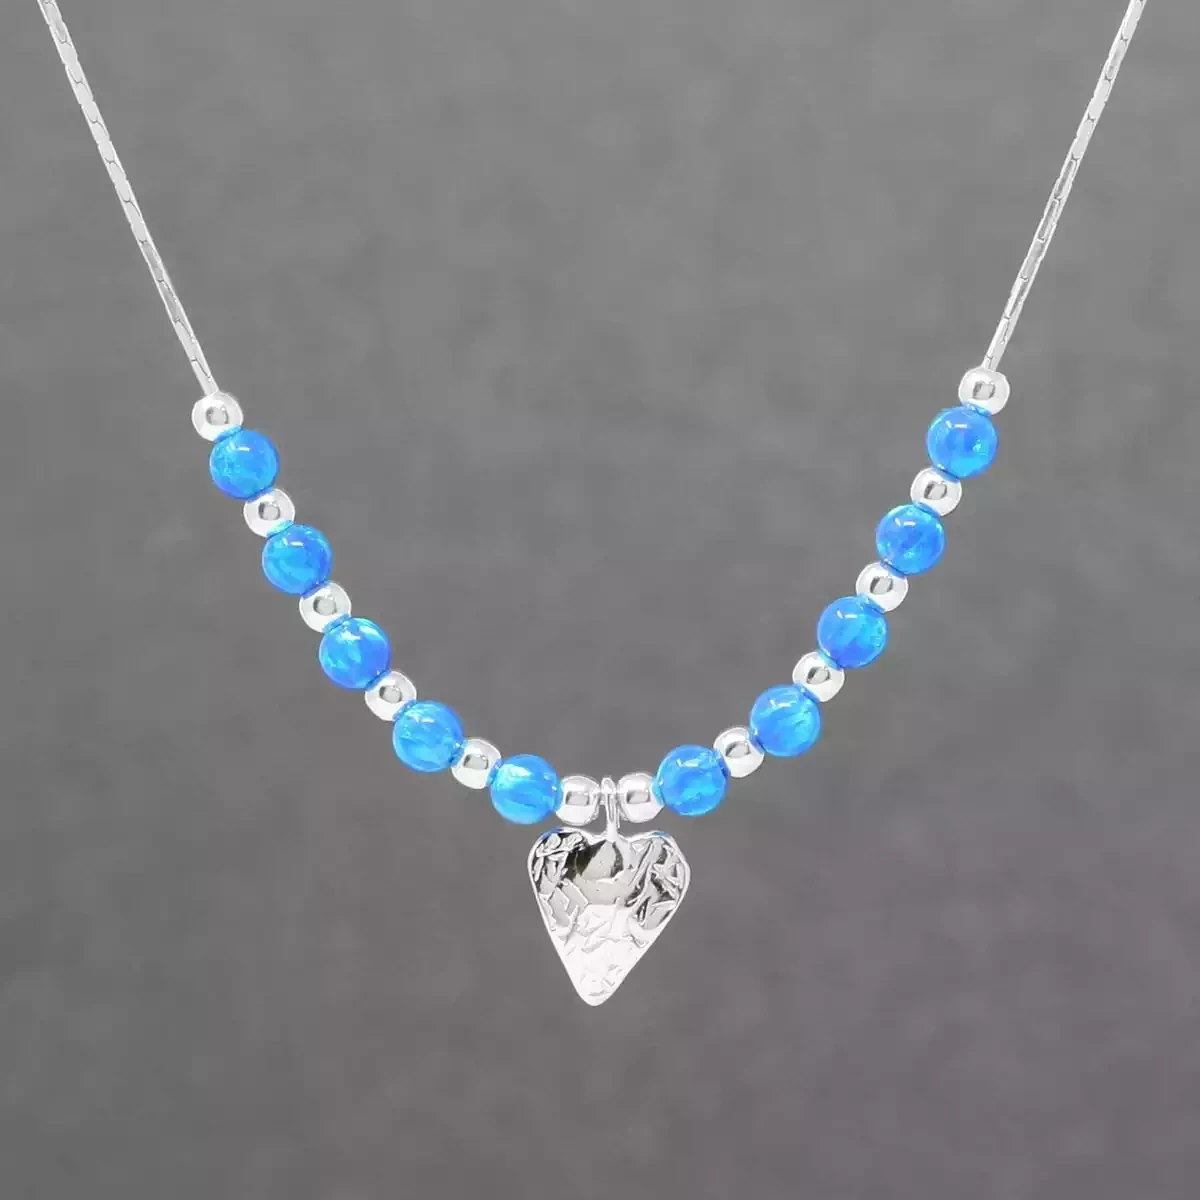 Hammered Heart Charm Silver and Opalite Necklace - Dark Blue by Lavan